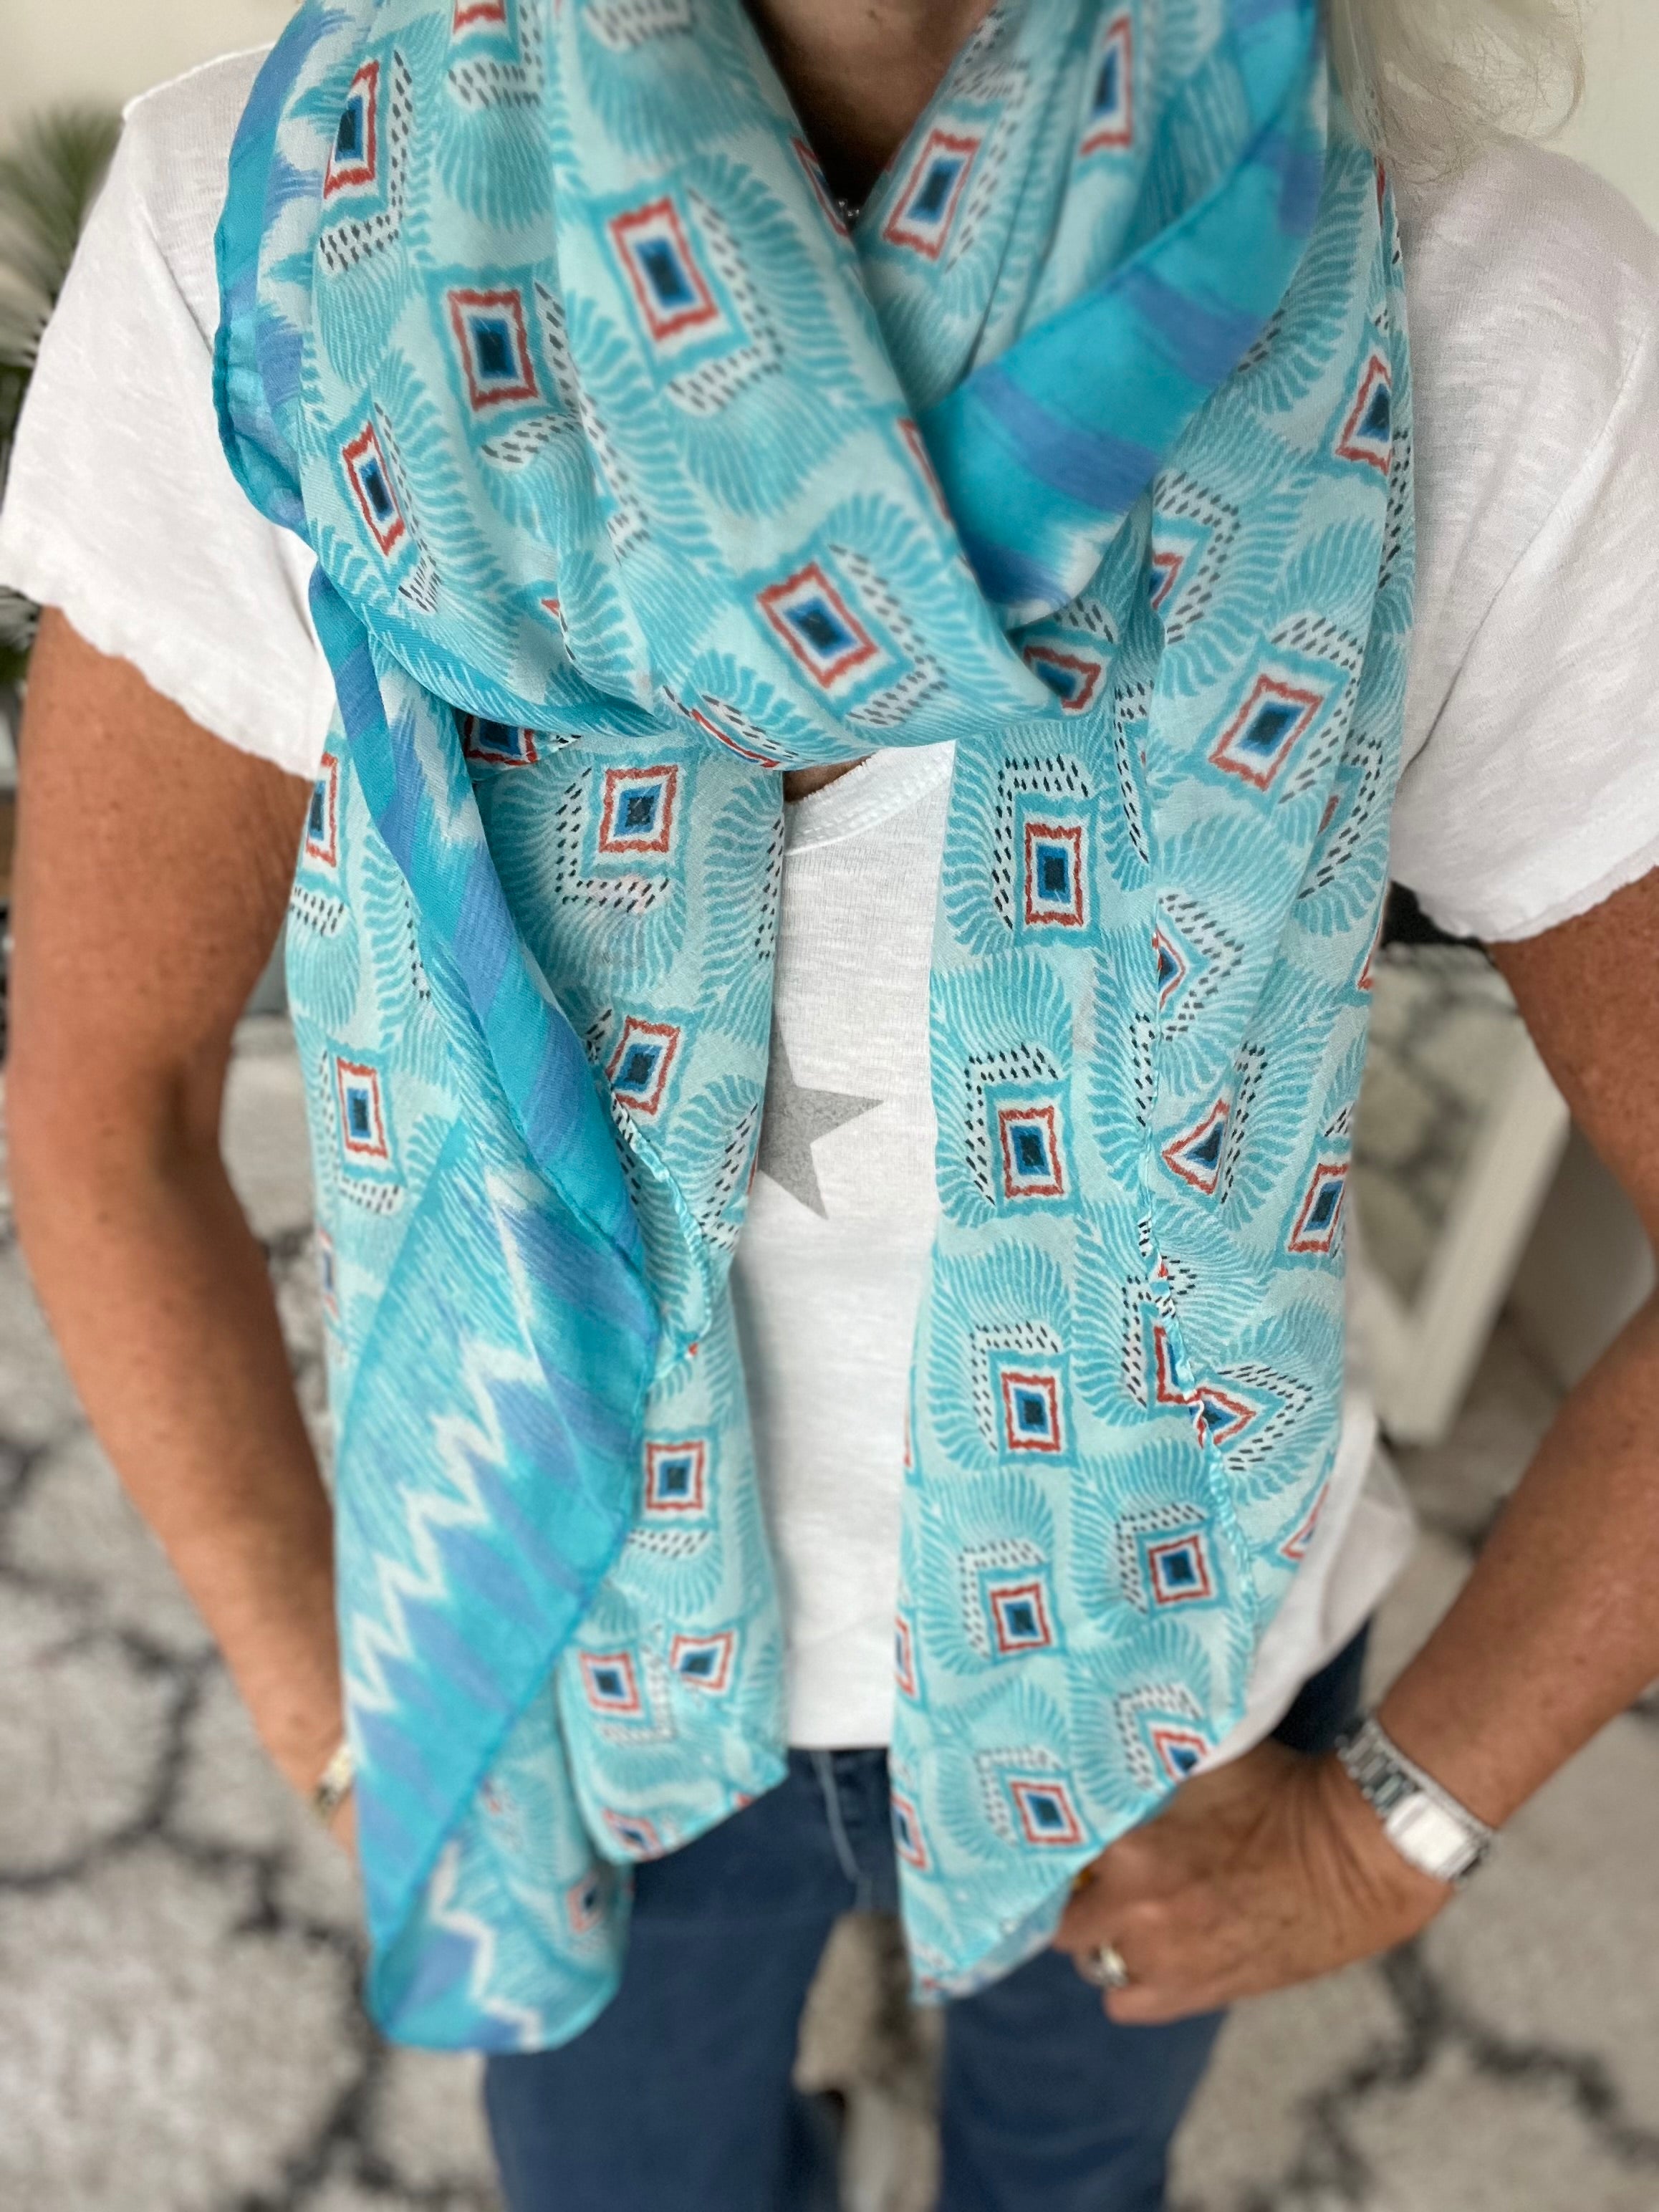 Diamond Pattern Scarf in Turquoise